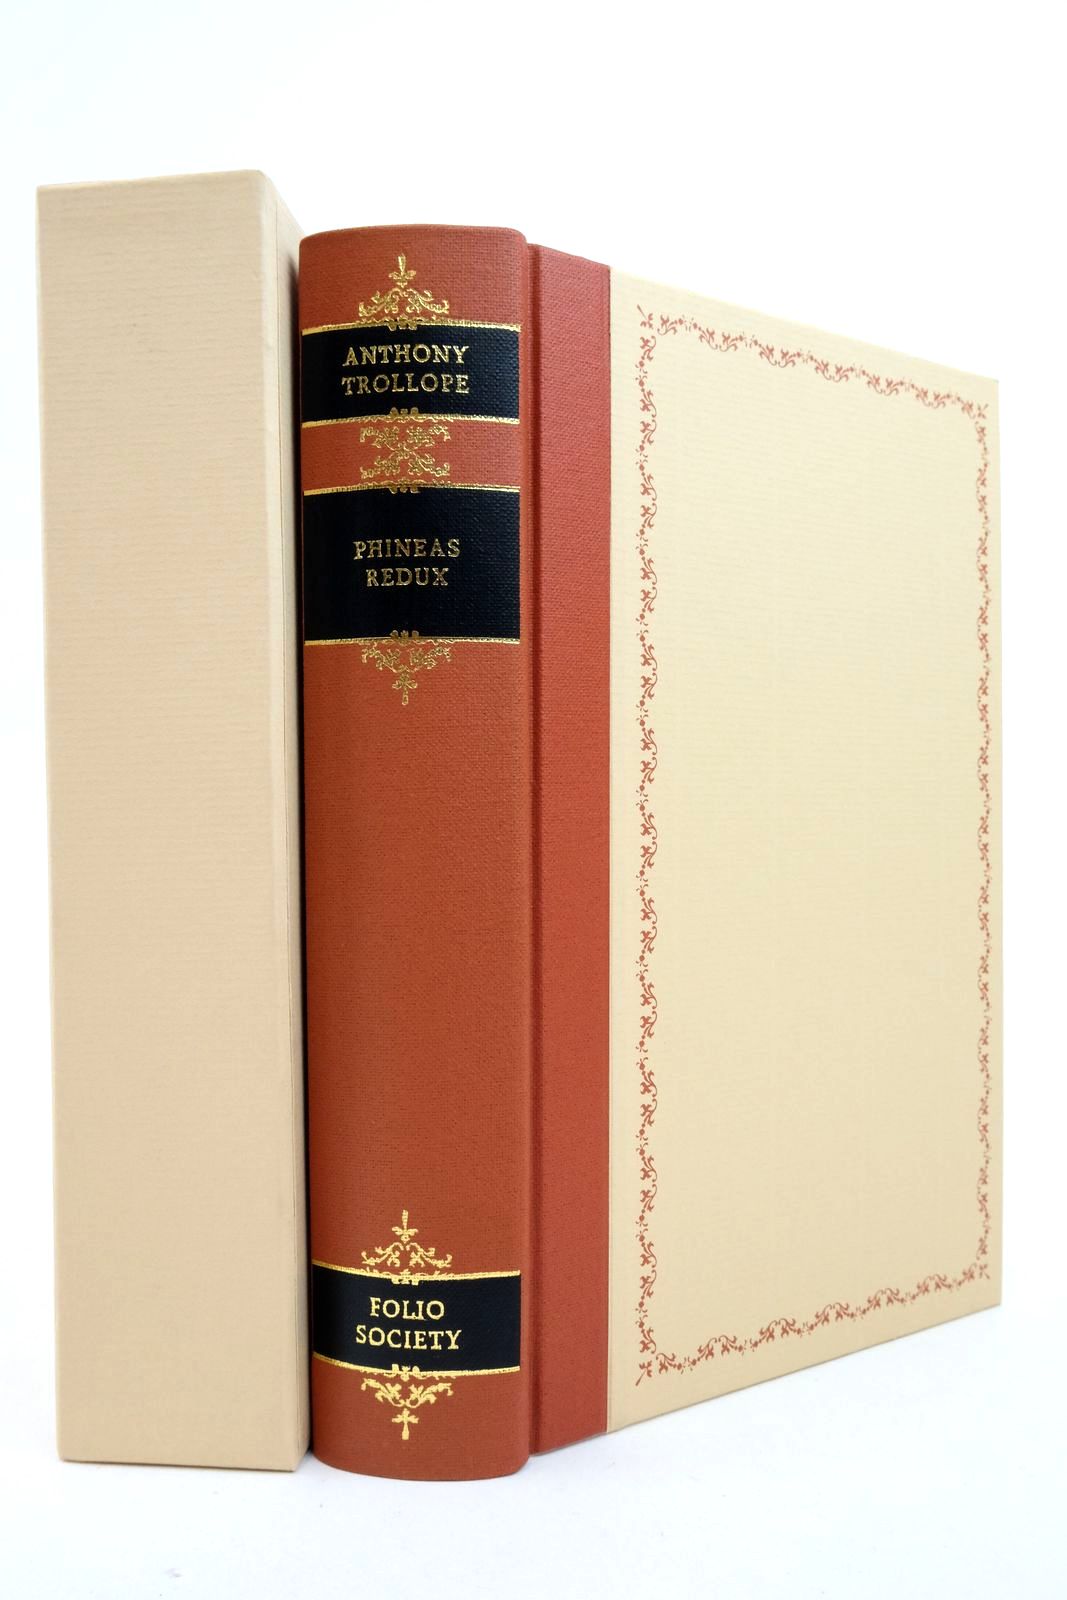 Photo of PHINEAS REDUX written by Trollope, Anthony illustrated by Thomas, Llewellyn published by Folio Society (STOCK CODE: 2138297)  for sale by Stella & Rose's Books